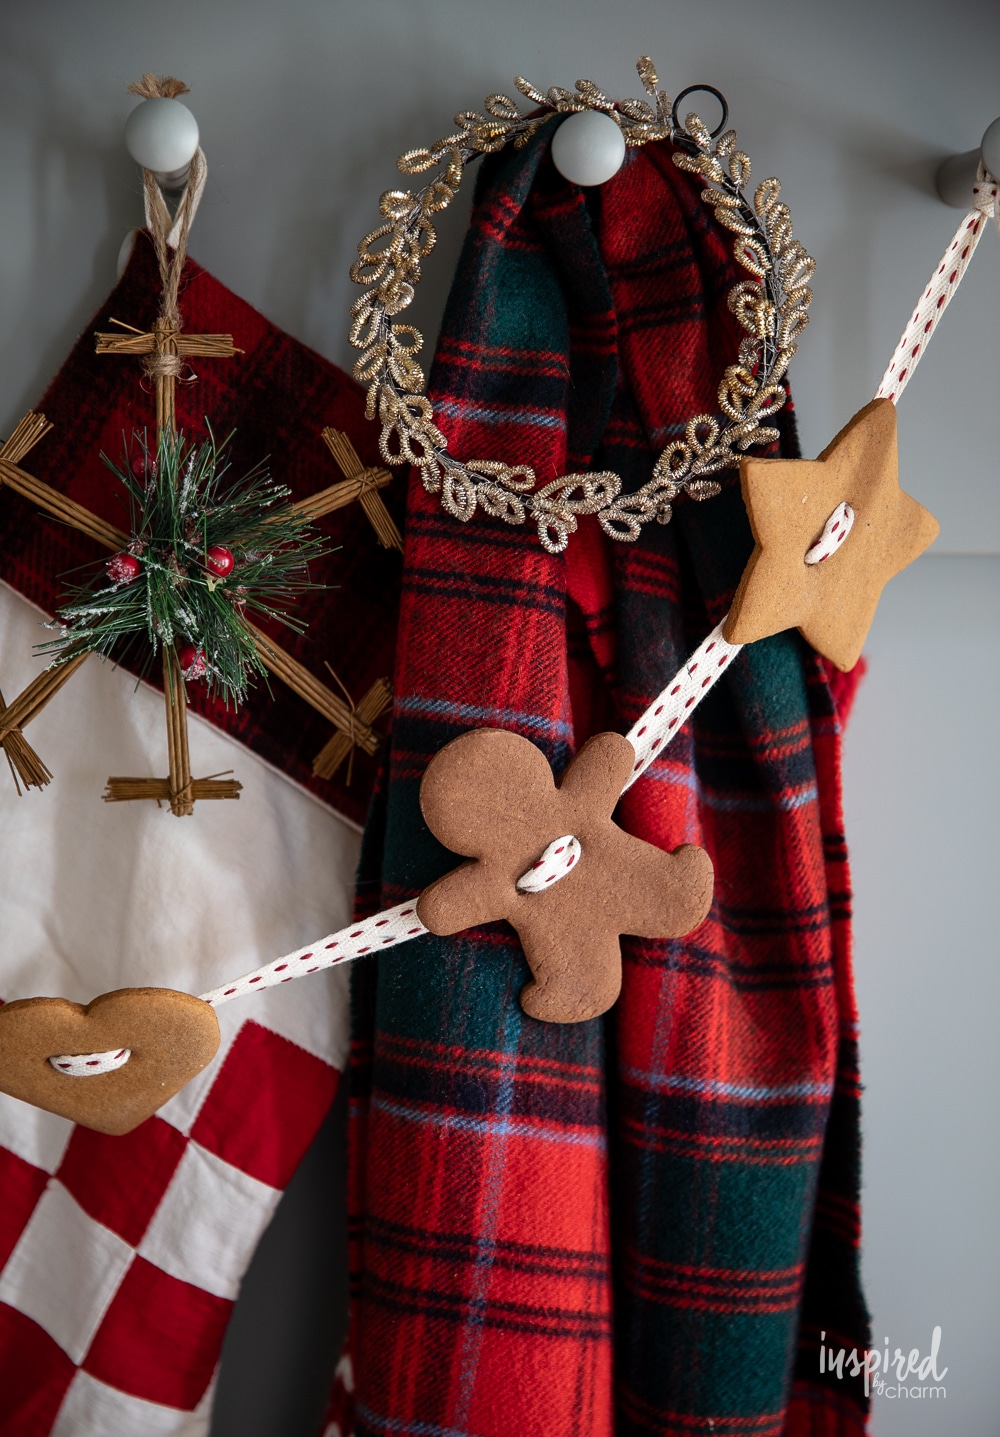 gingerbread garlad hung on pegs on vintage red plaid scarf.